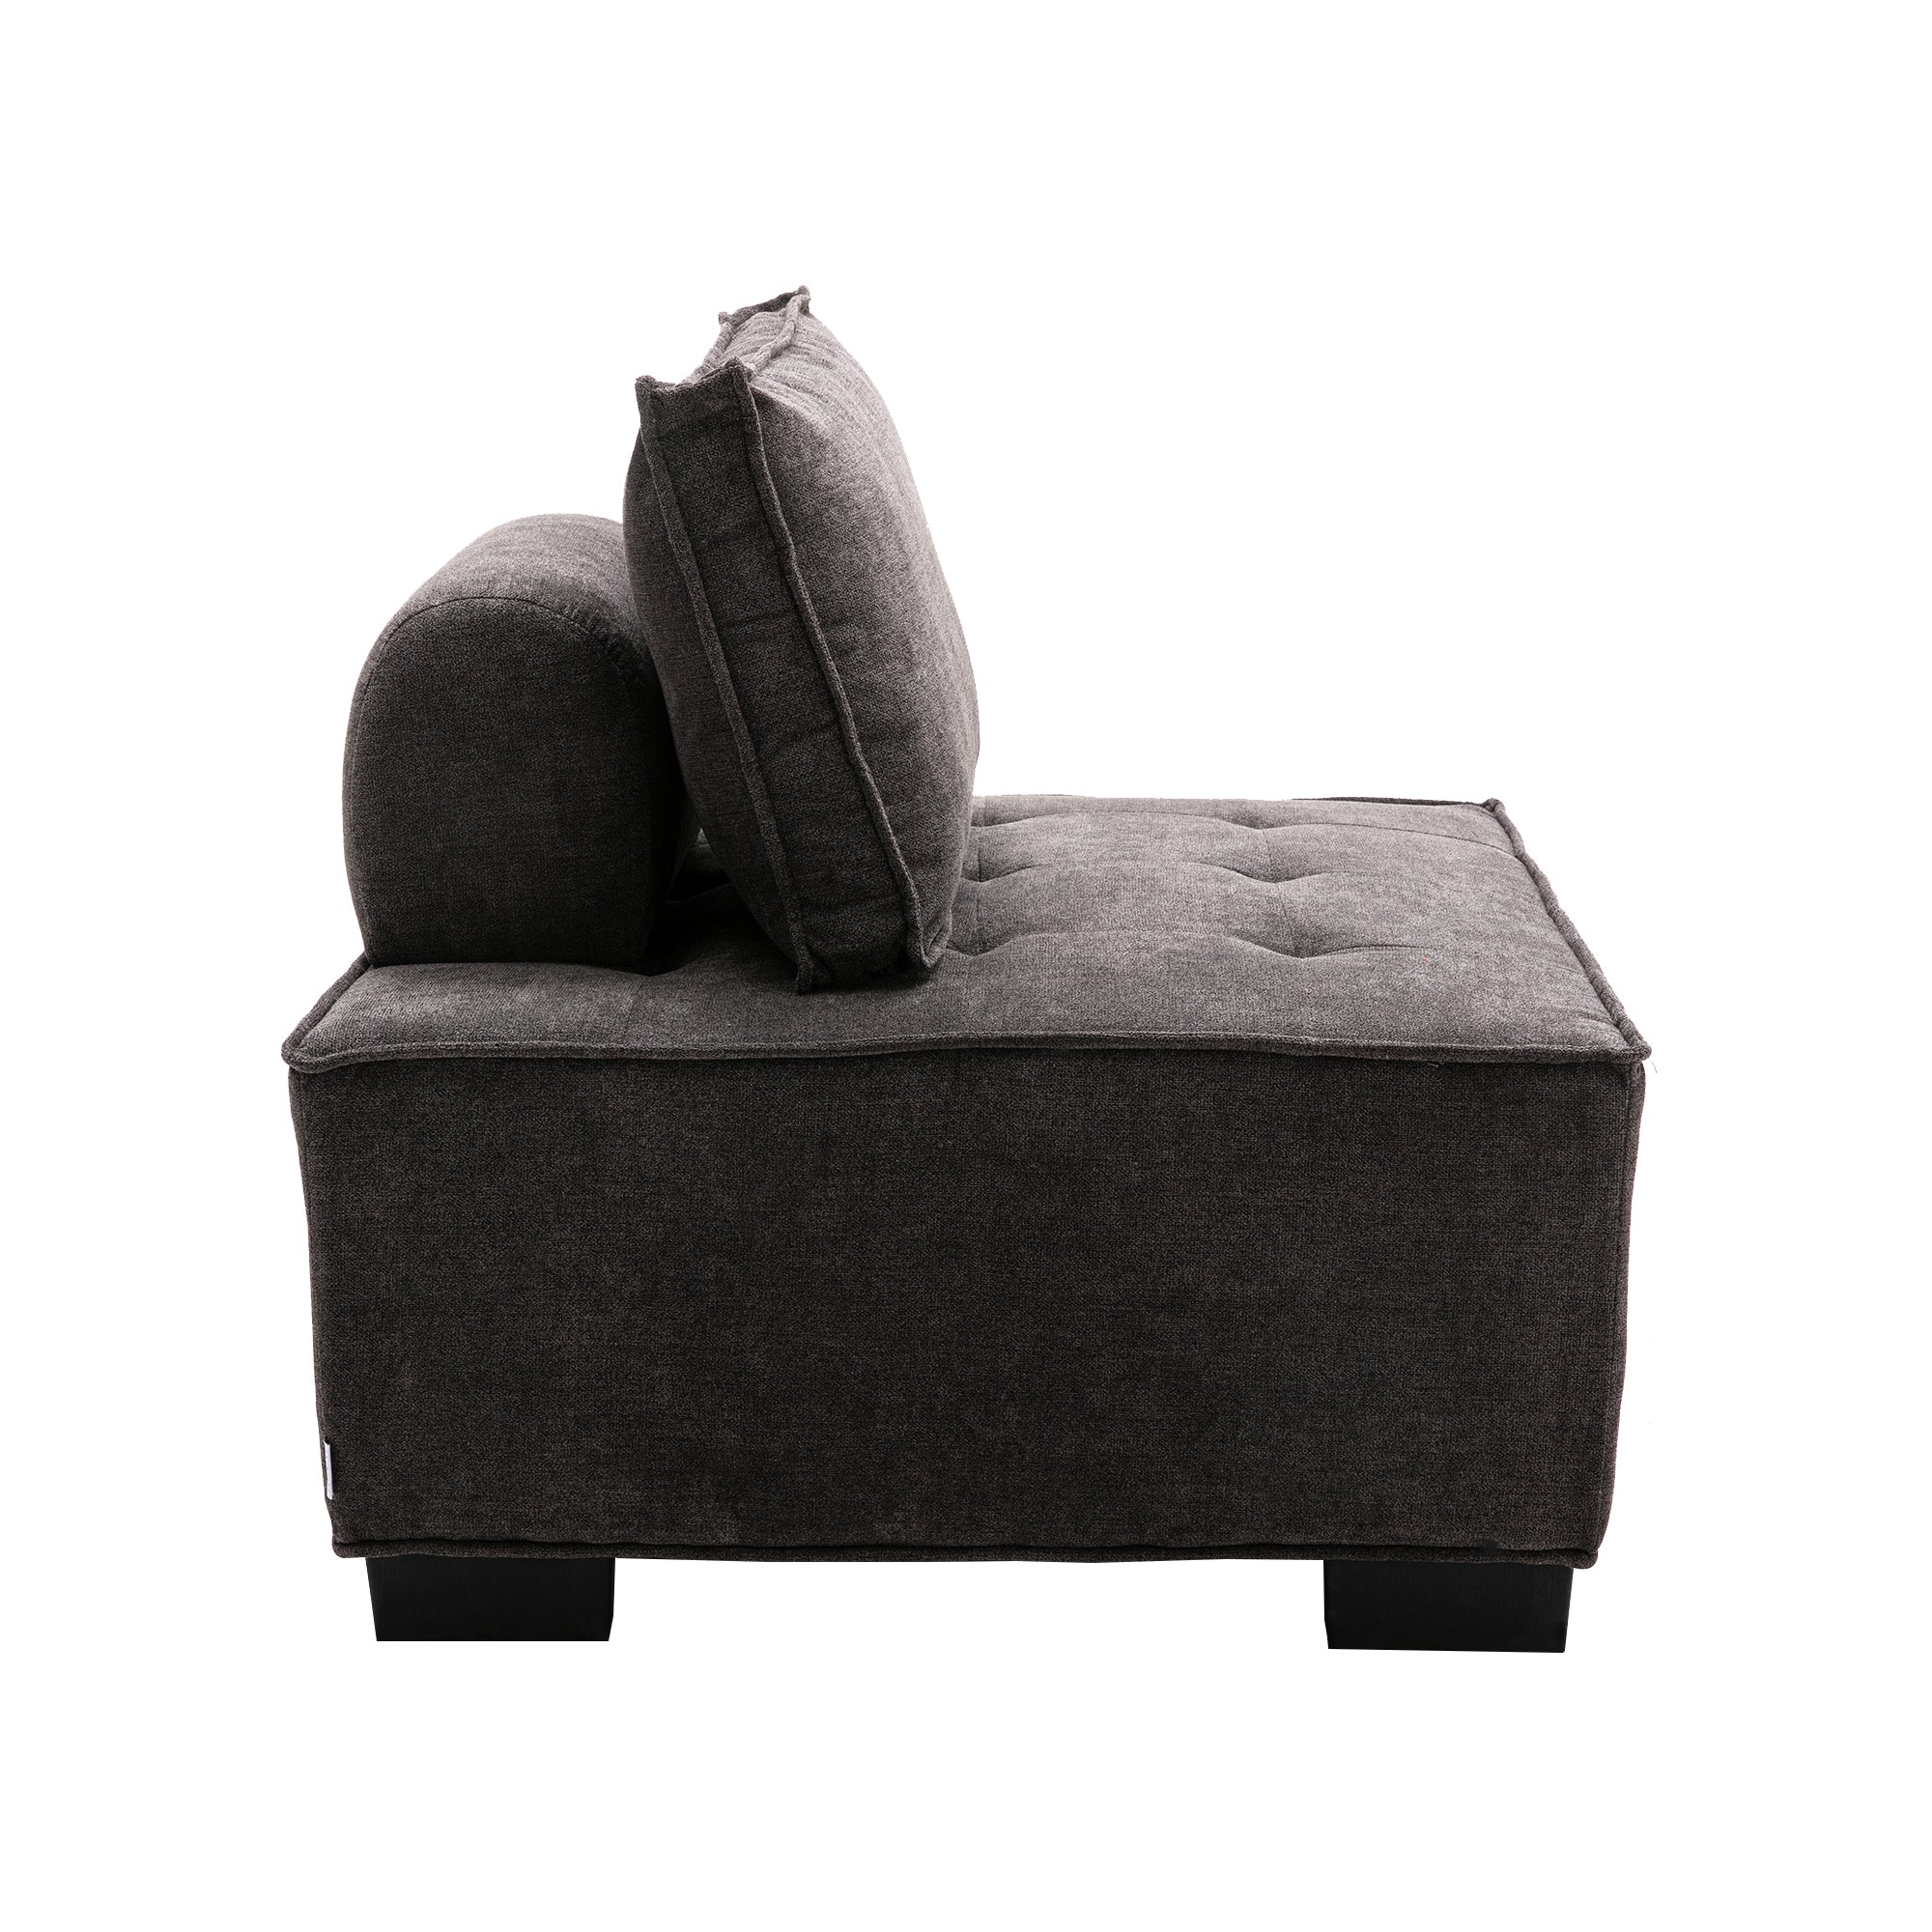 COOMORE LIVING ROOM OTTOMAN LAZY CHAIR grey-polyester